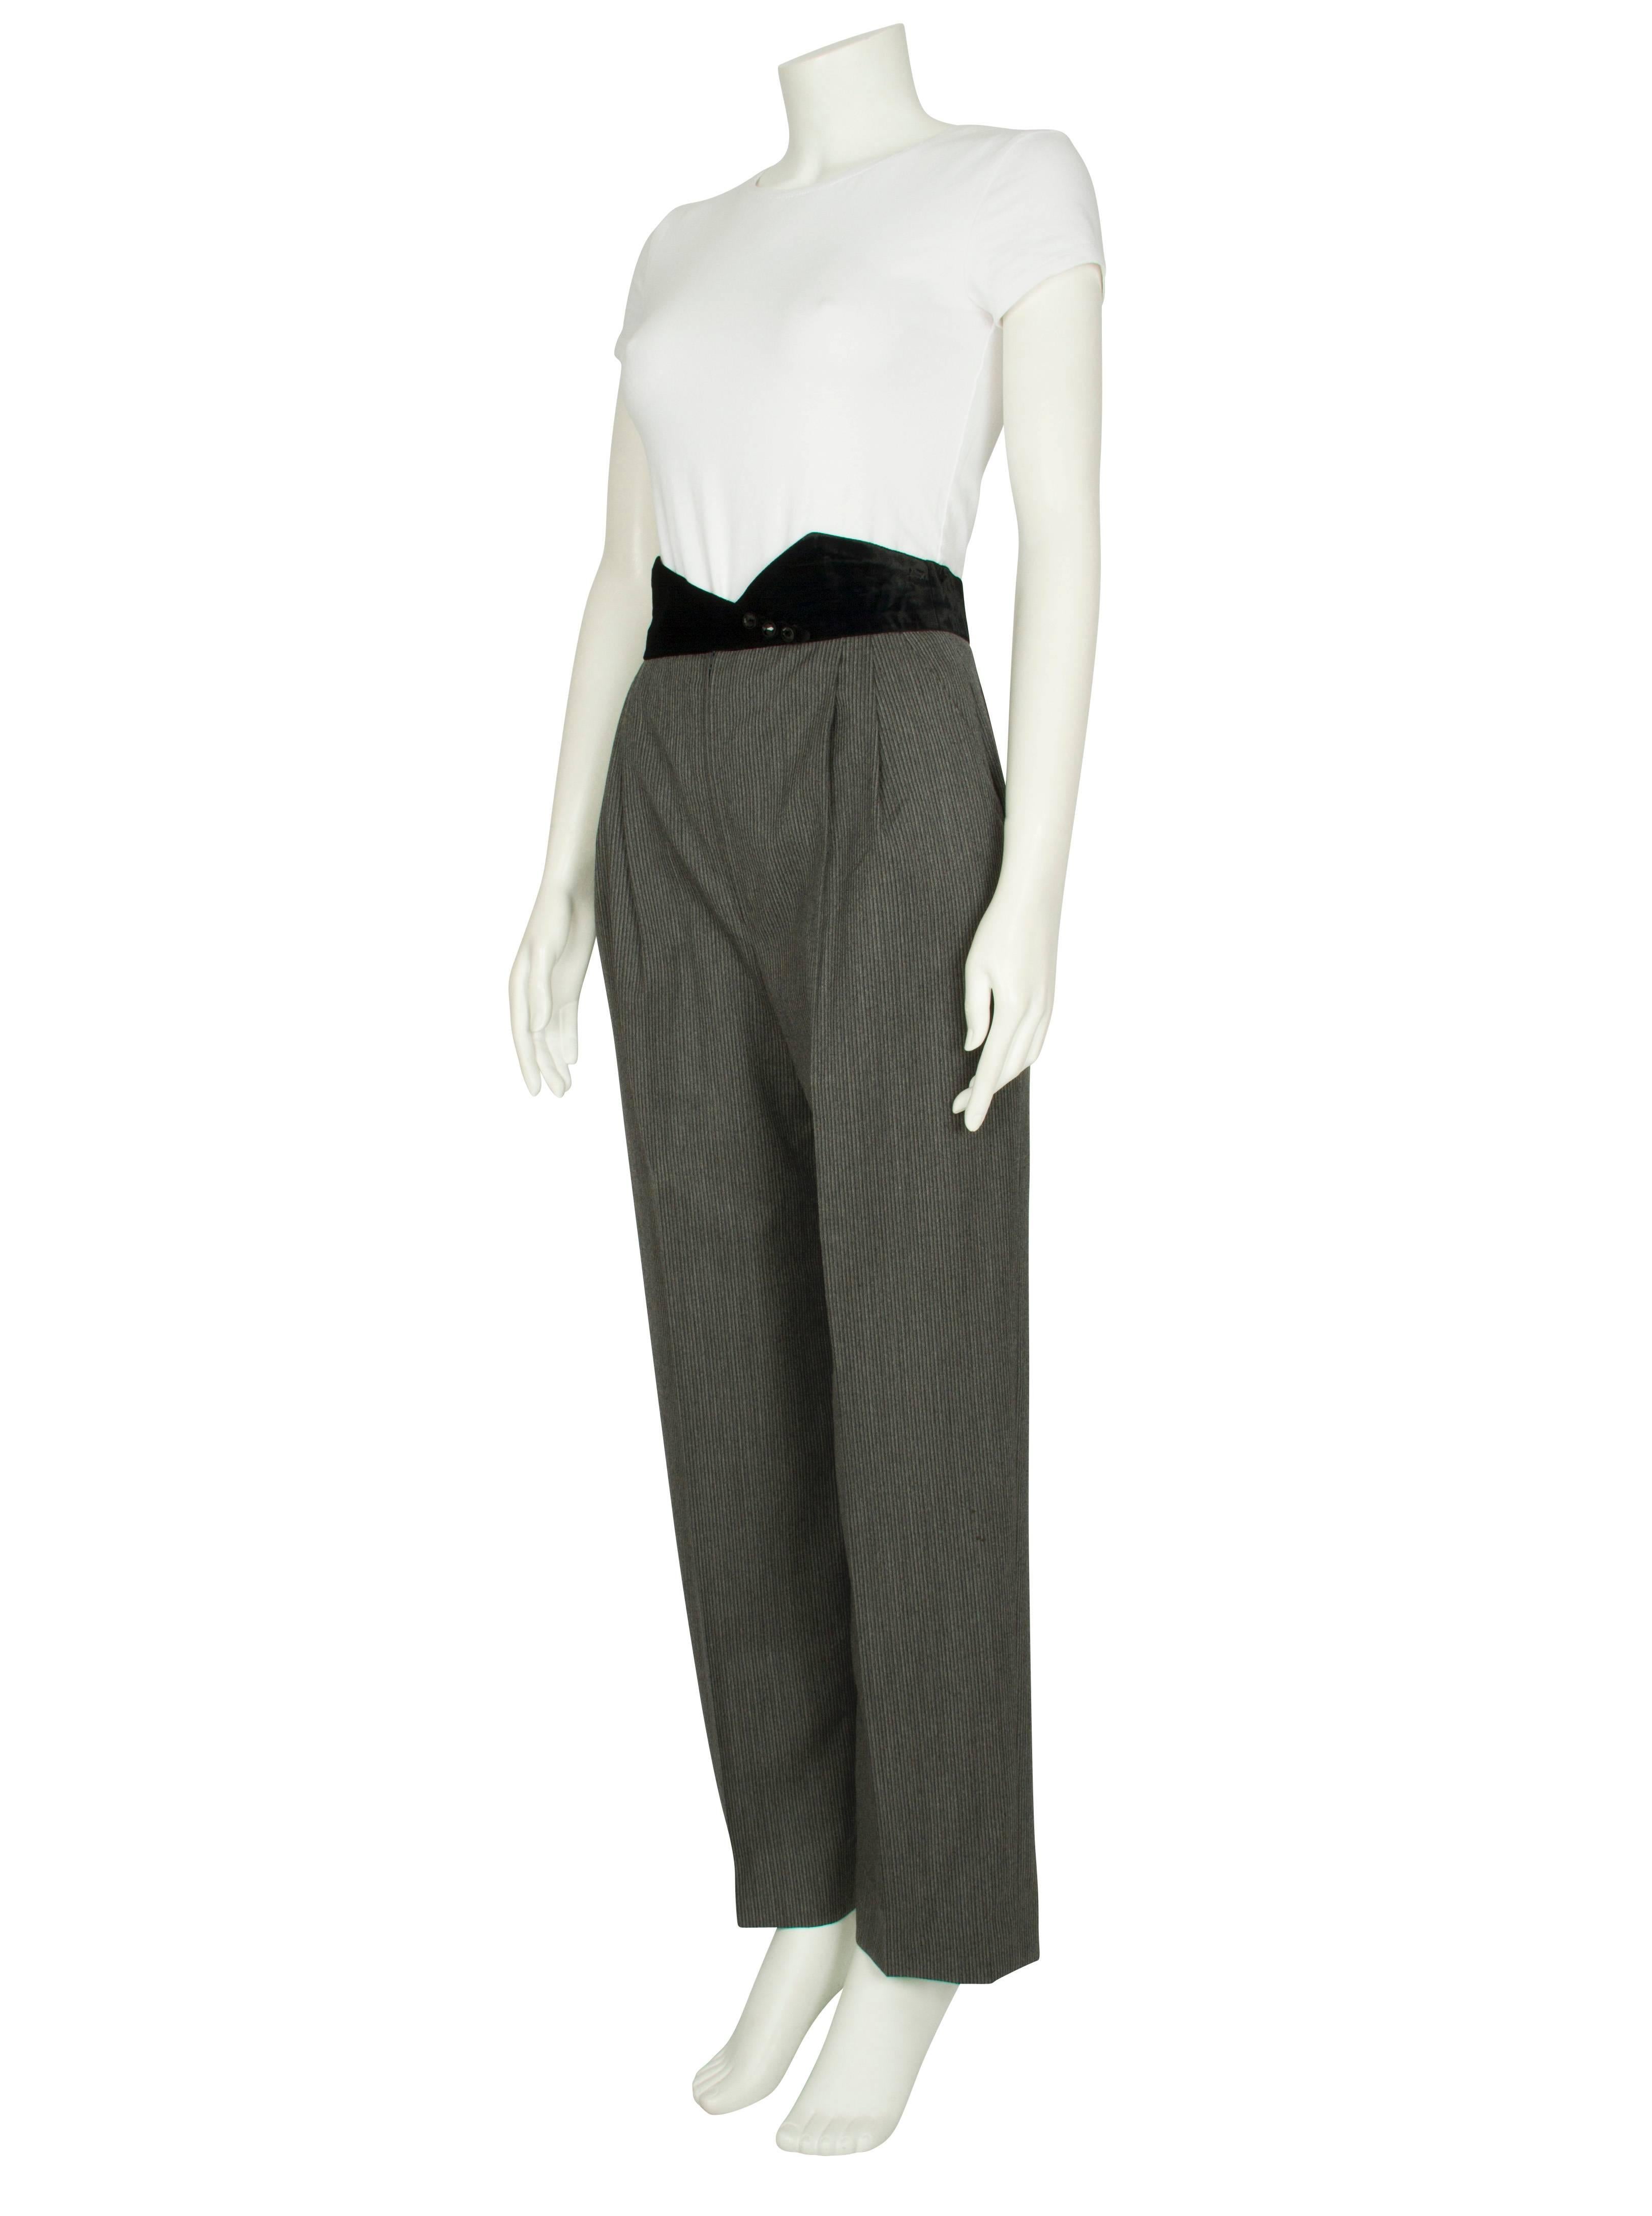 A pair of 1980s Ungaro Couture grey pinstripe wool trousers featuring a pleated front and an asymmetrical pointed velvet waistband embellished with jewelled buttons. The trousers have knife pockets at the hips and tapered legs. Excellent vintage